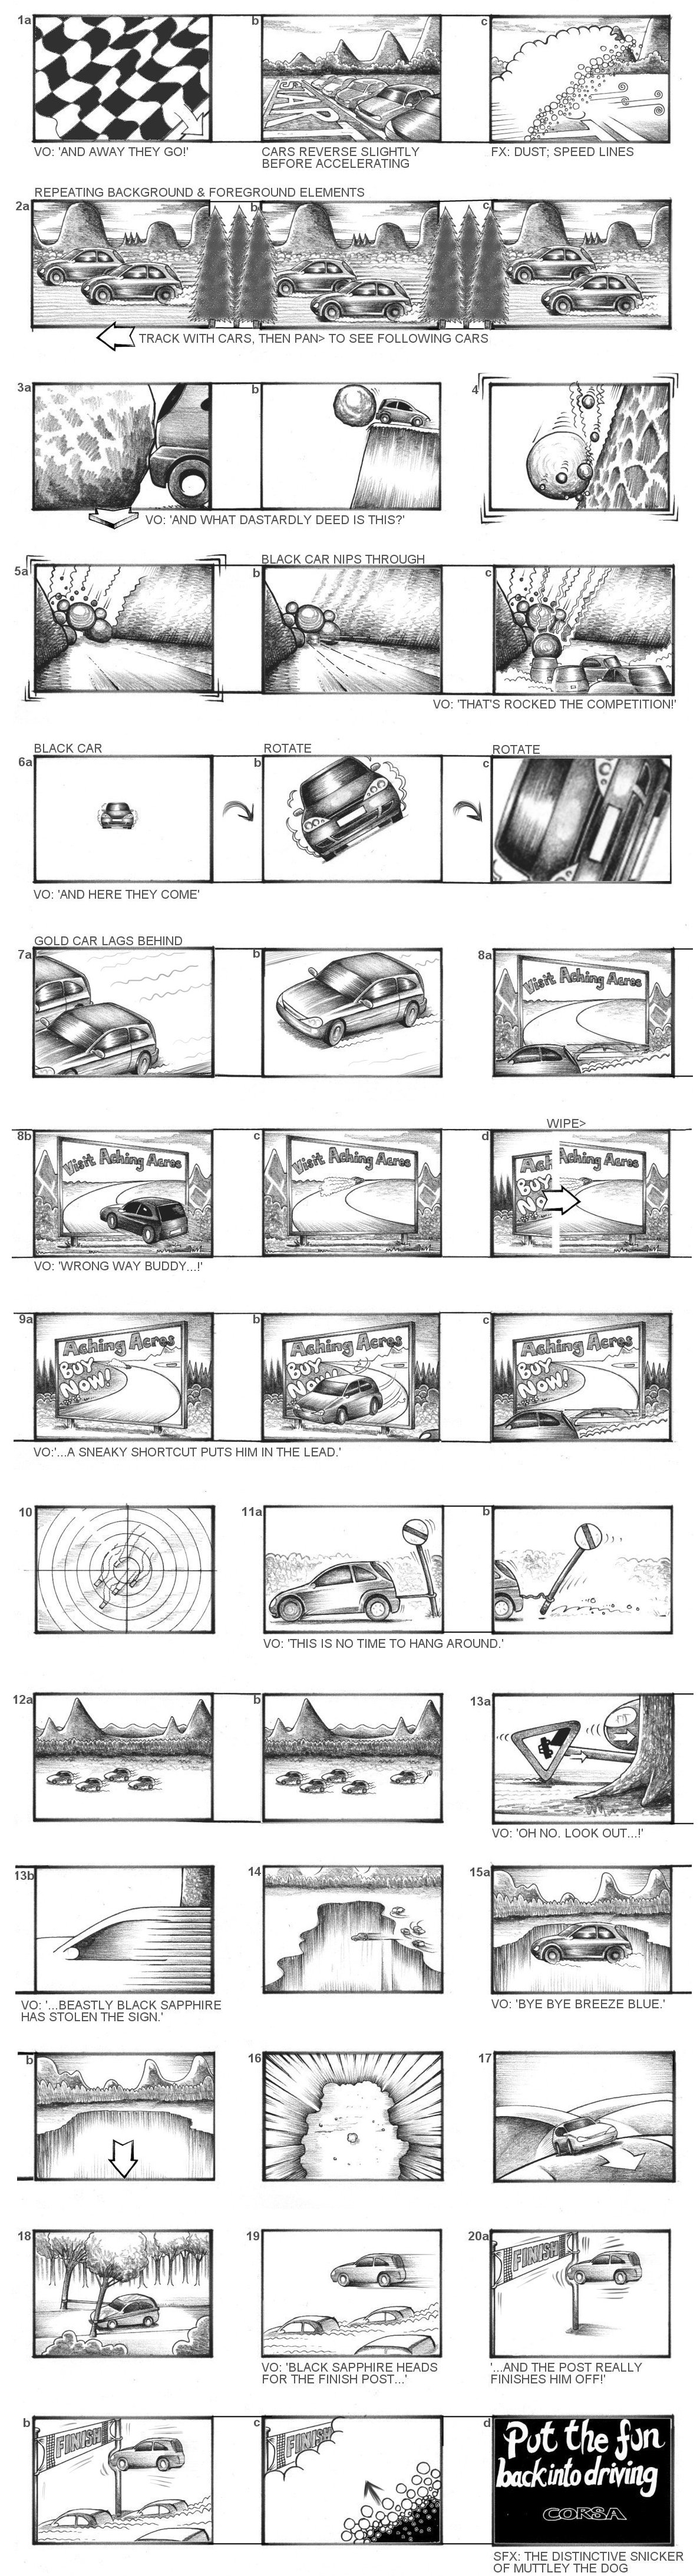 VAUXHALL CORSA 'WACKY RACES' STORYBOARDS BY ANDY SPARROW